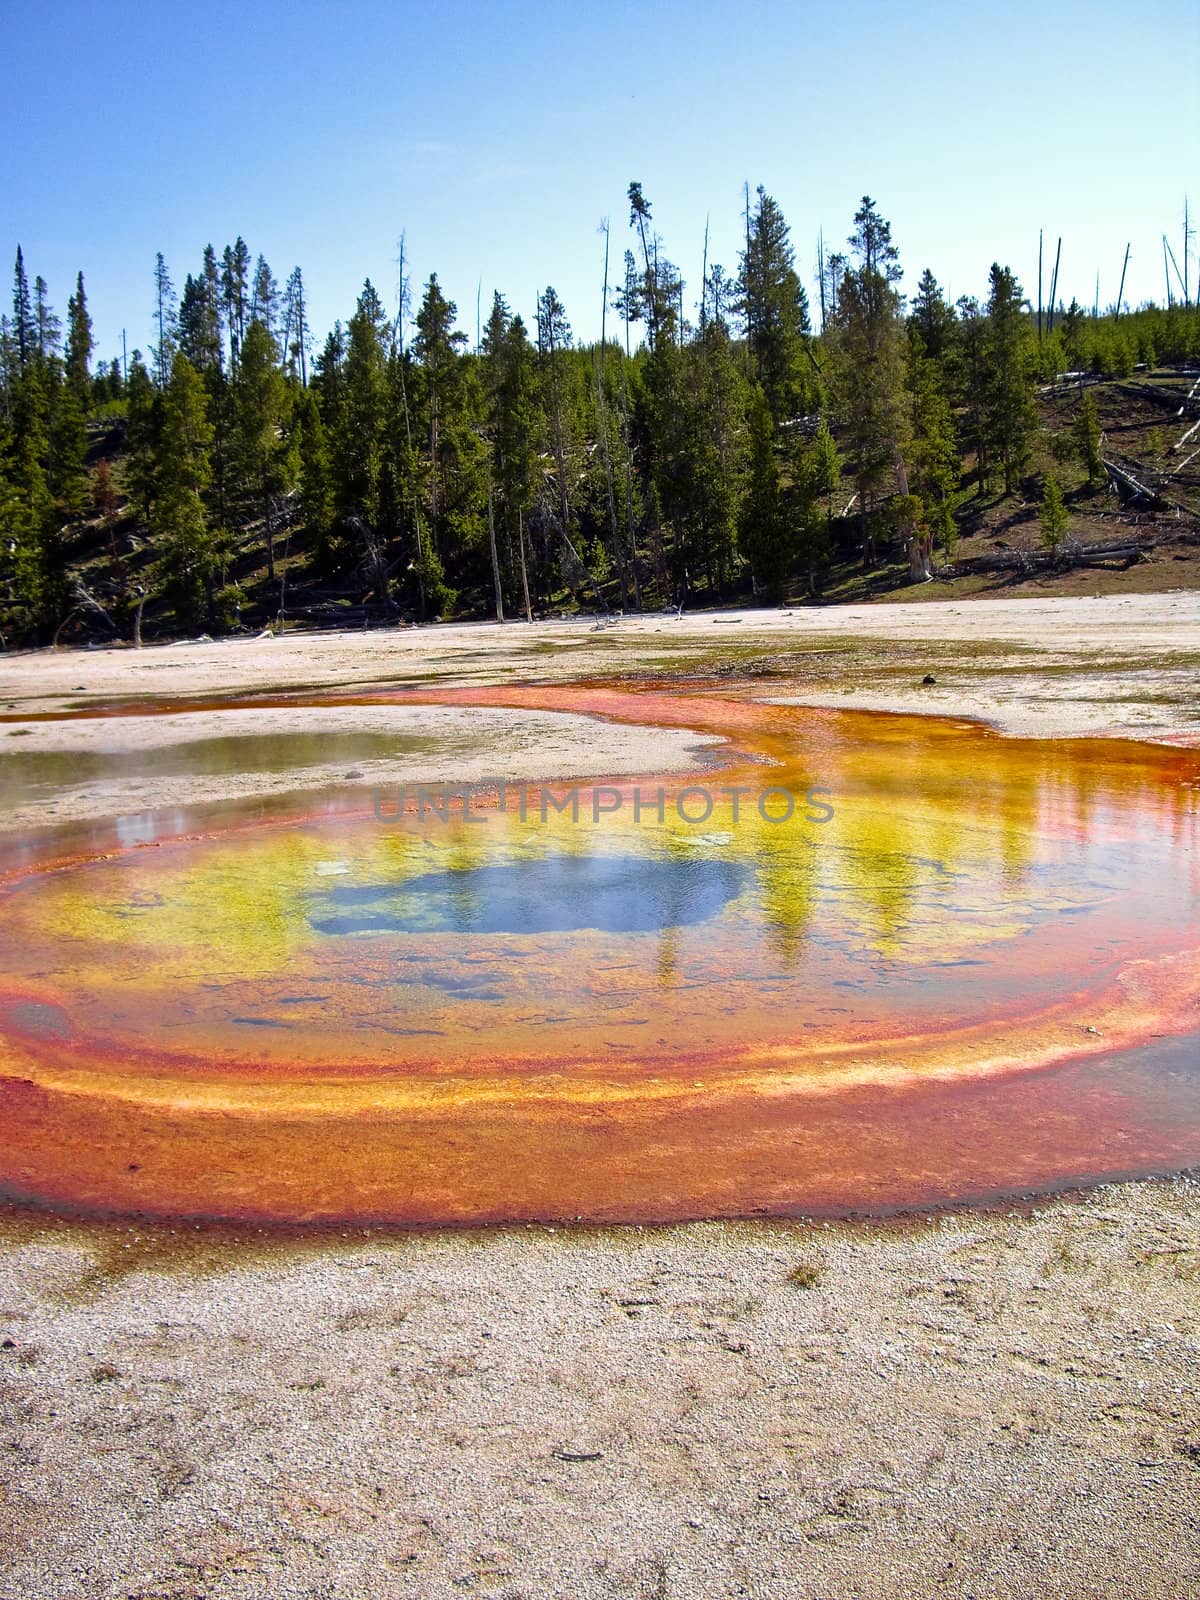 Orange and Yellow thermal pool Yellowstone by emattil